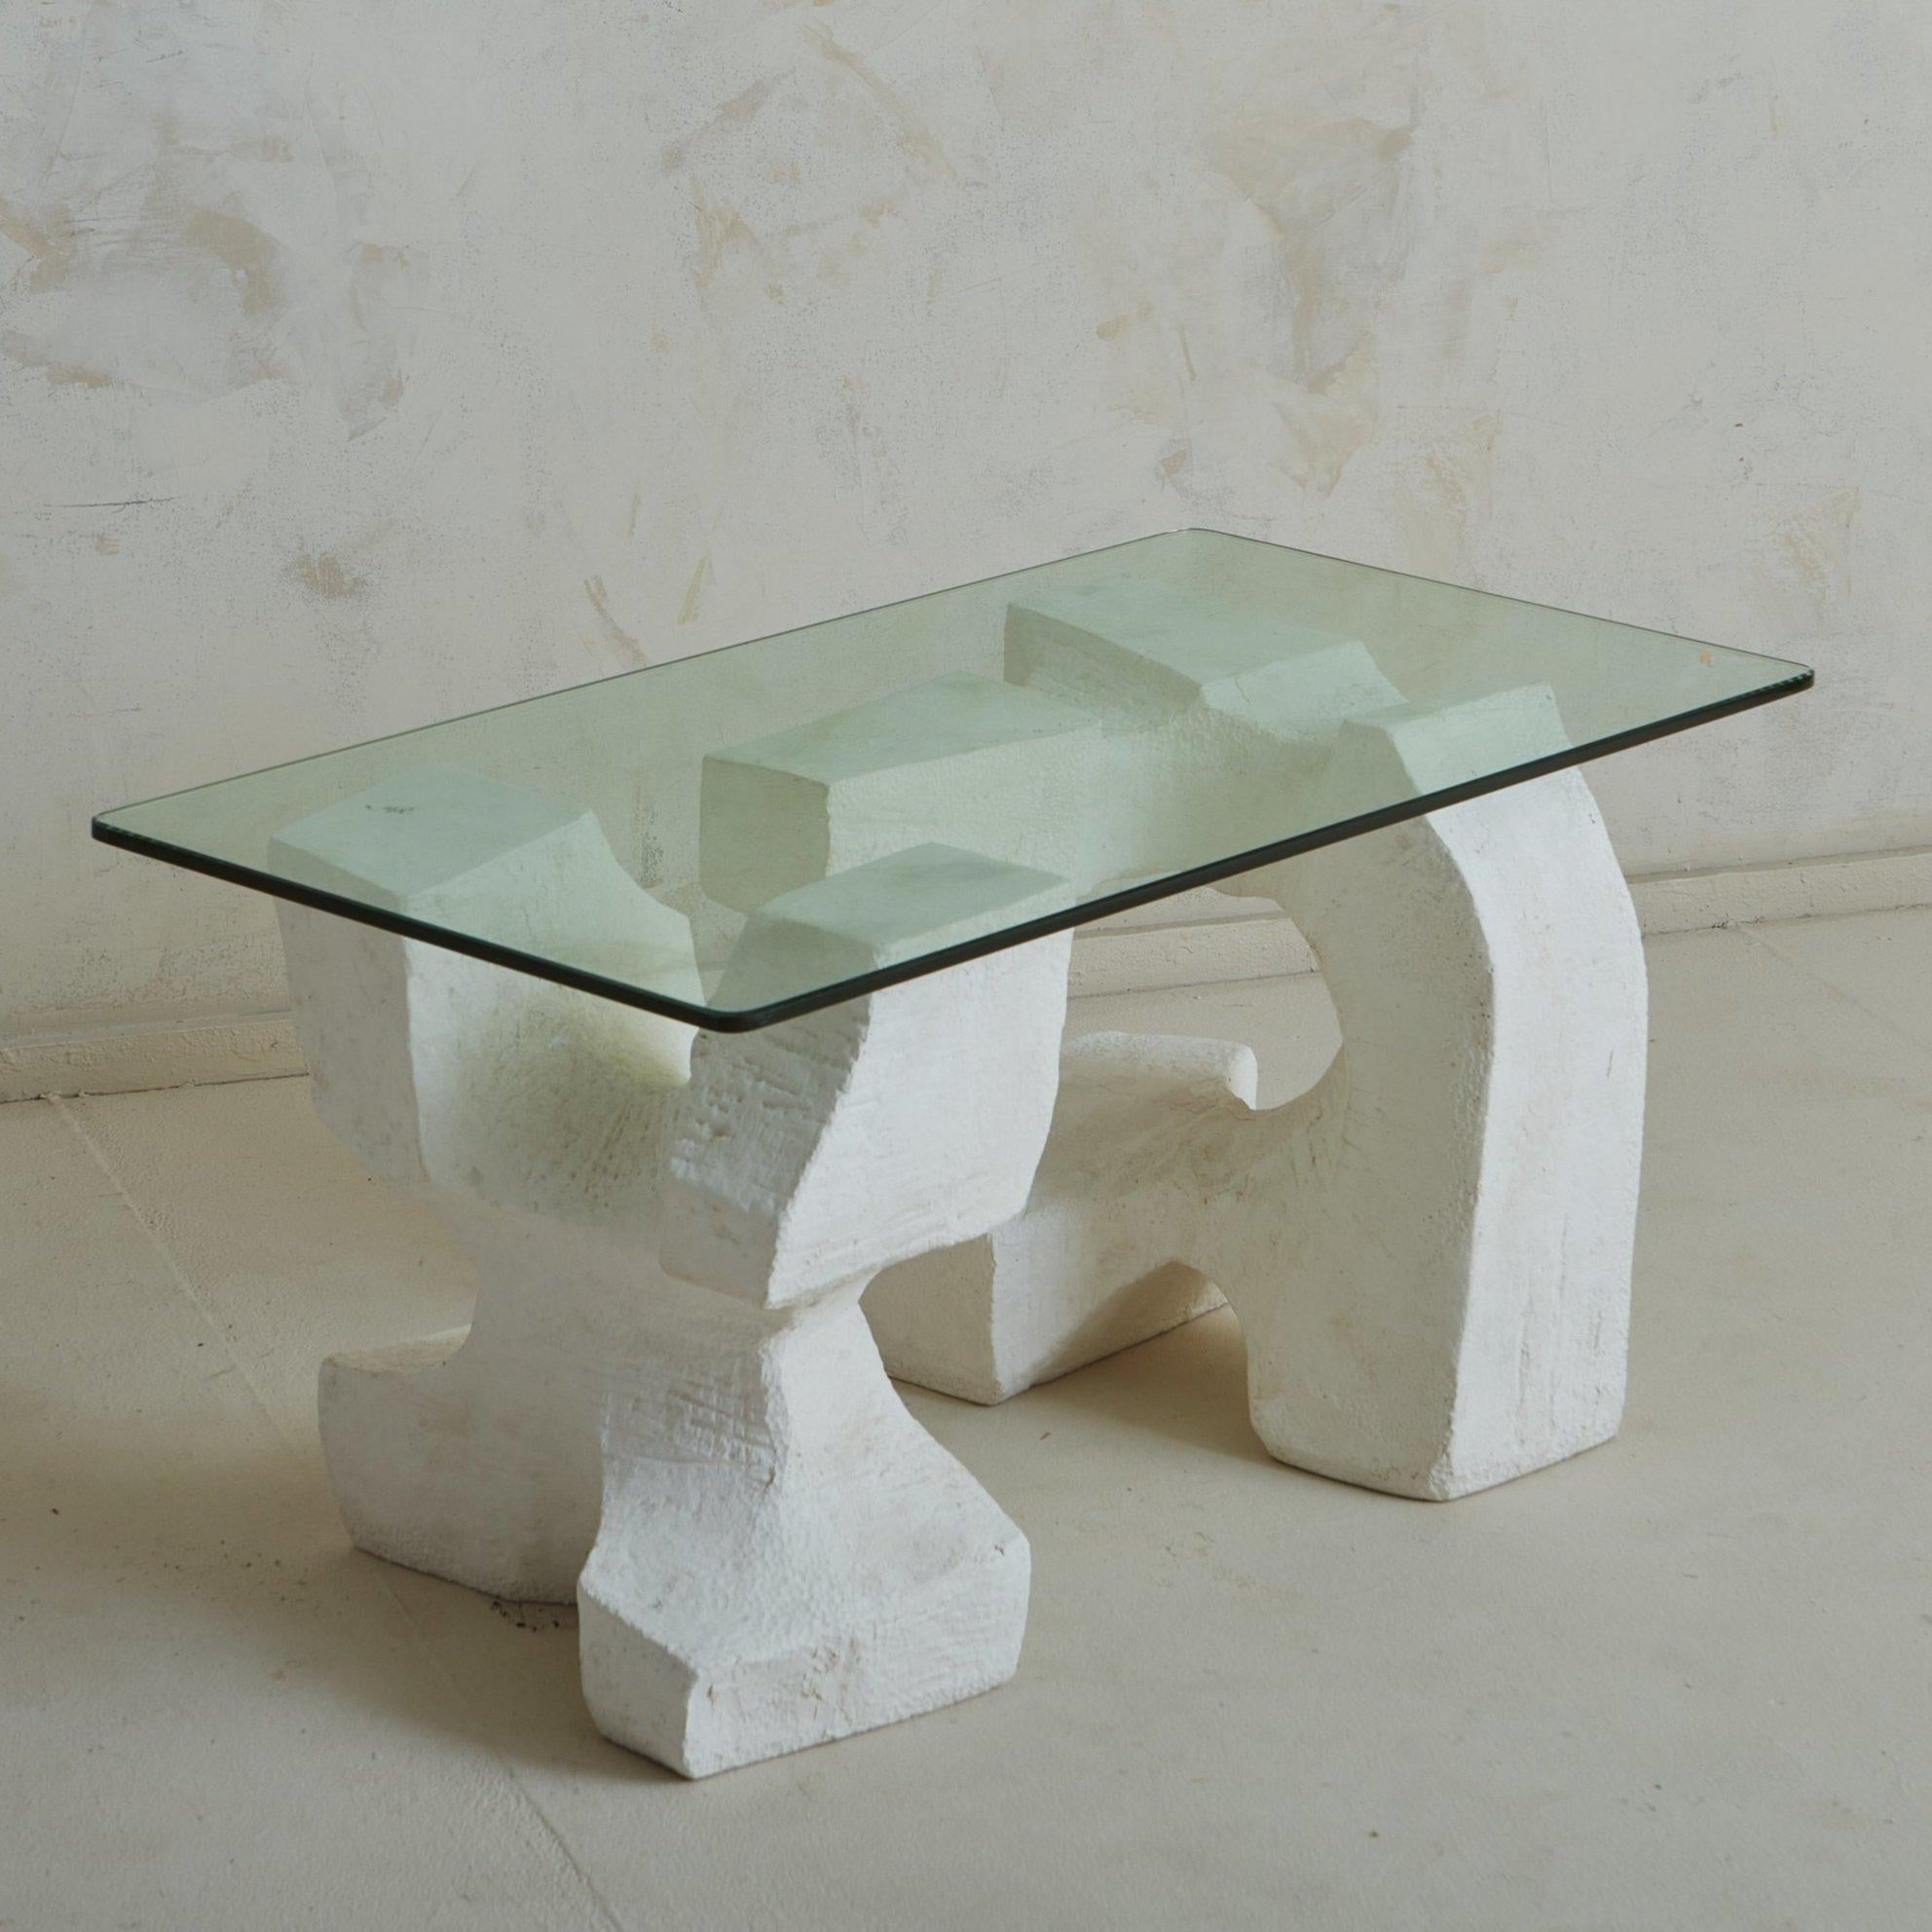 A vintage Brutalist French coffee table featuring a sculptural white plaster base with organic curves and a textured finish. The artful, asymmetric base is composed of two elements which support a rectangular glass tabletop with a beveled edge.